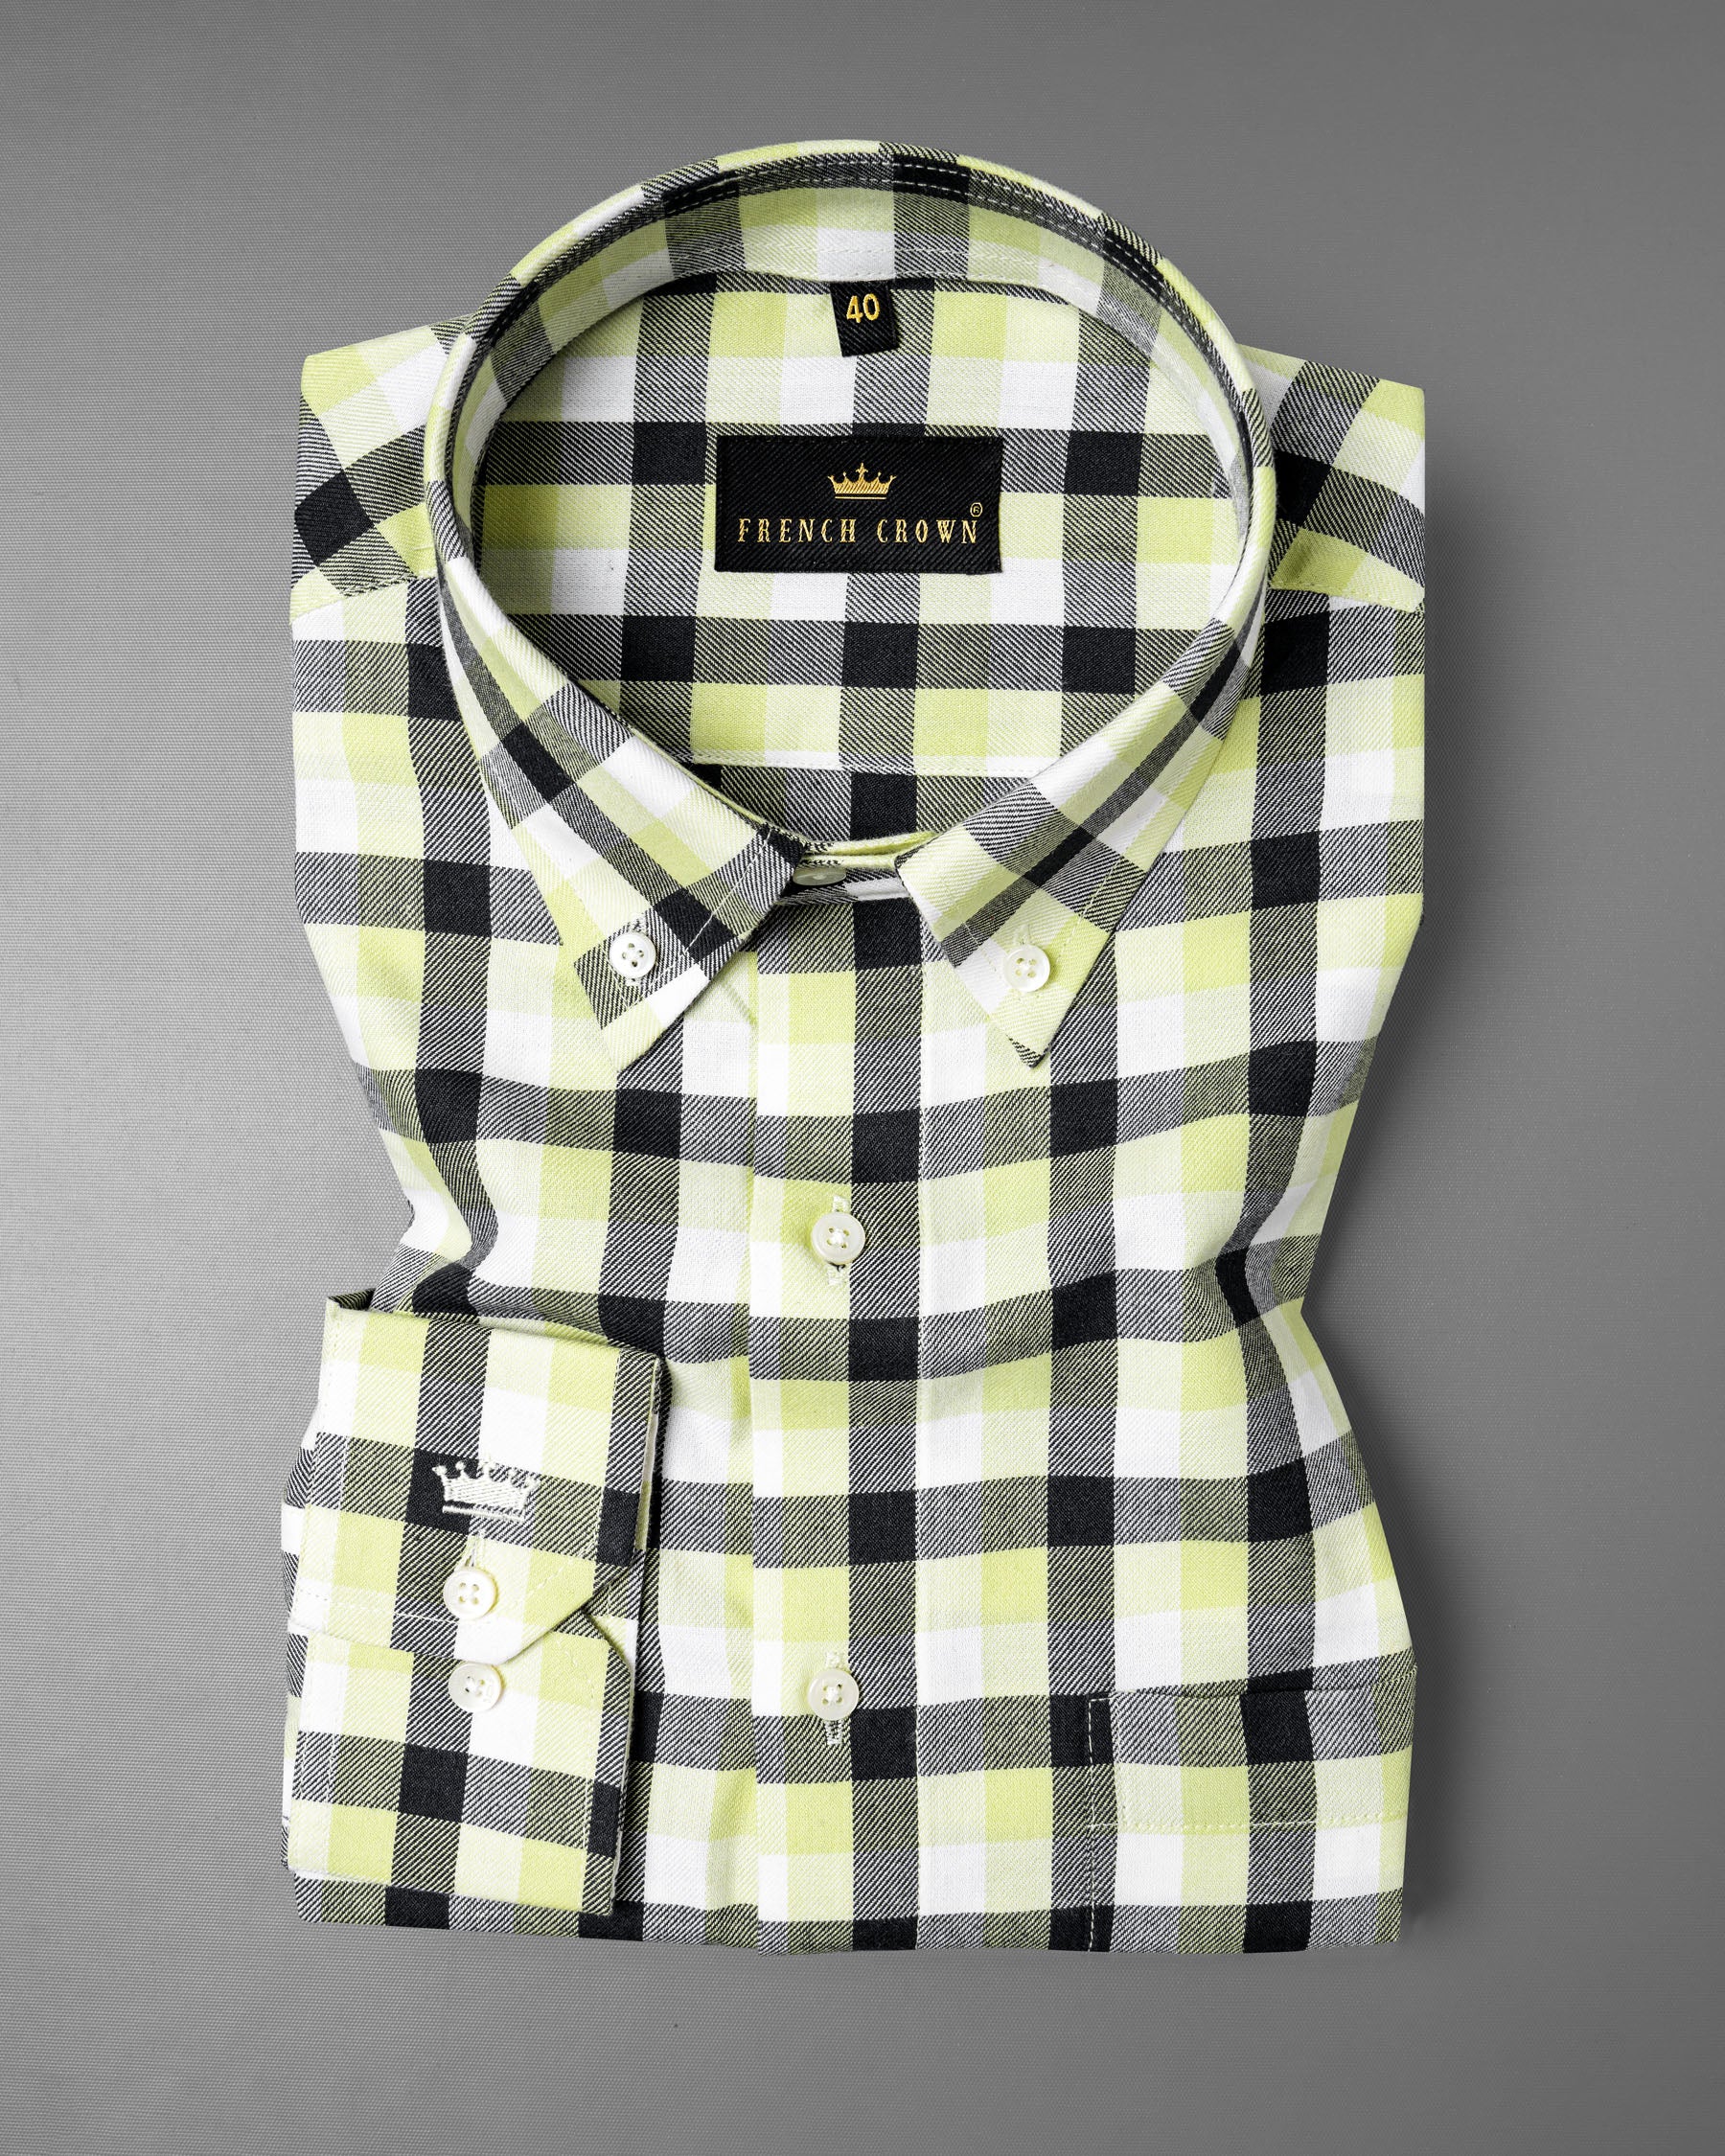 Jade Black with Pale Goldenrod Twill Plaid Premium Cotton Shirt 5700-BD-38, 5700-BD-H-38, 5700-BD-39, 5700-BD-H-39, 5700-BD-40, 5700-BD-H-40, 5700-BD-42, 5700-BD-H-42, 5700-BD-44, 5700-BD-H-44, 5700-BD-46, 5700-BD-H-46, 5700-BD-48, 5700-BD-H-48, 5700-BD-50, 5700-BD-H-50, 5700-BD-52, 5700-BD-H-52